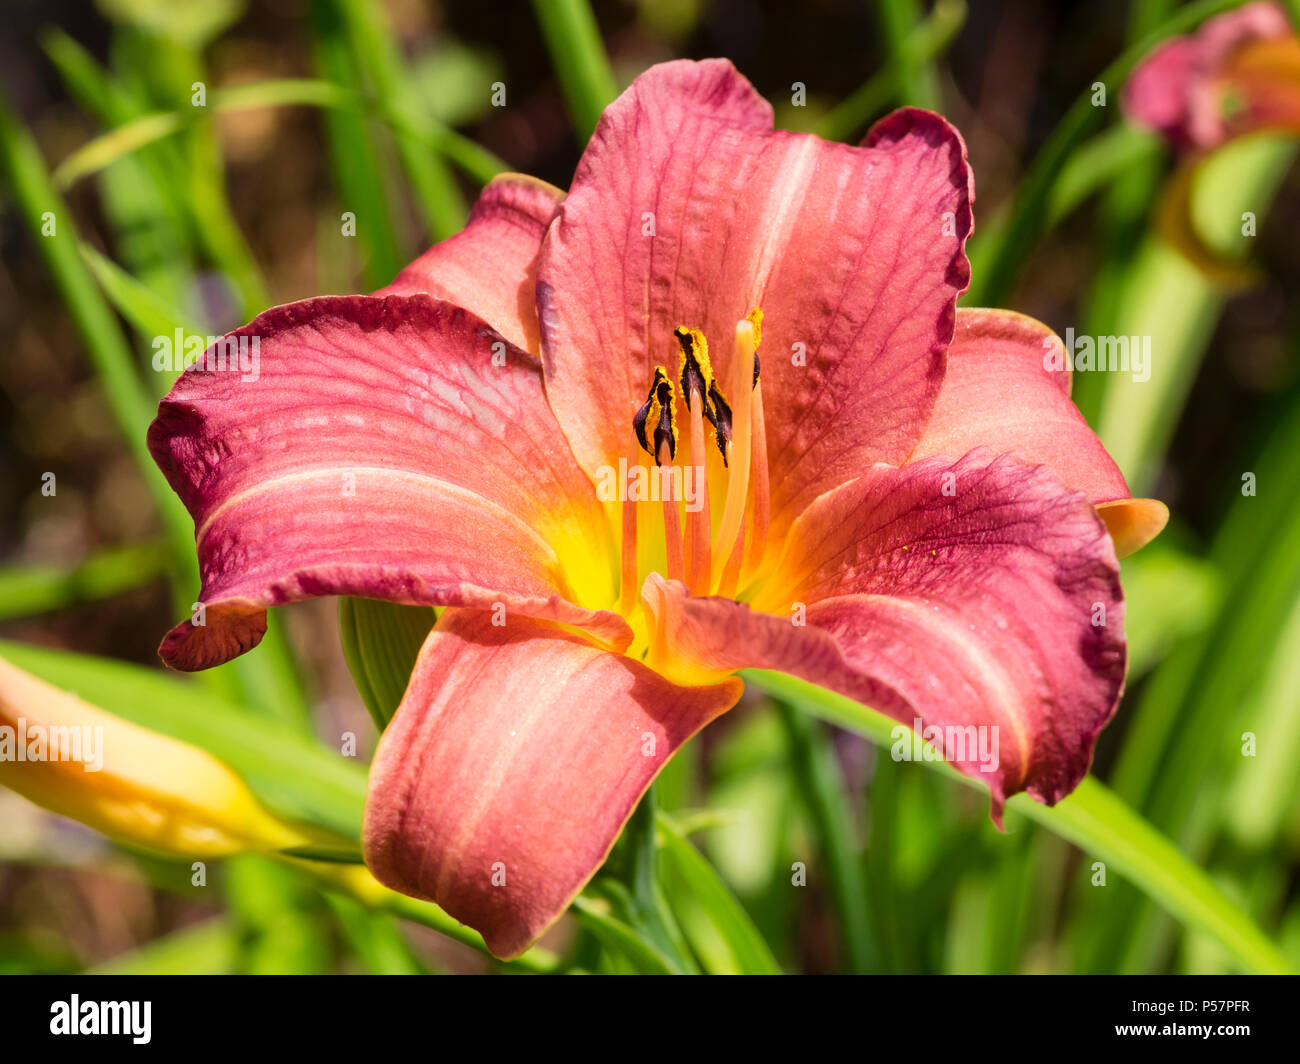 Wine red flower of the repeat flowering, mid to late summer blooming daylily, Hemerocallis 'Little Wine Cup' Stock Photo